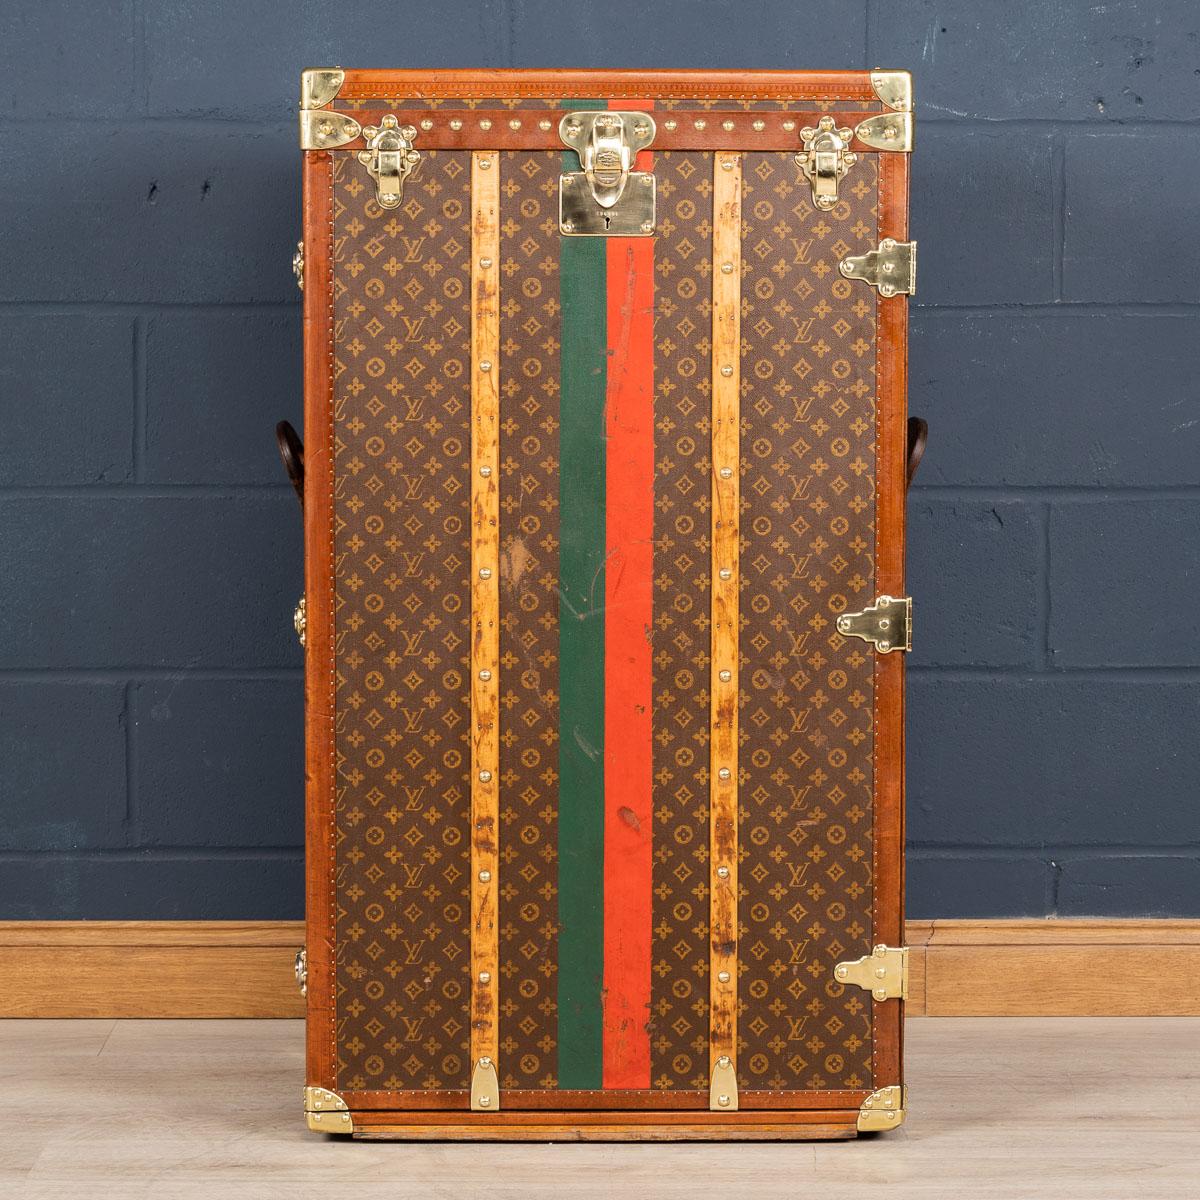 Antique 20th century wonderful Louis Vuitton “Lily Pons” trunk dating to the circa 1930s covered in monogram canvas, brass hardware and lozine leather trim. This type of trunk was named after the famous French actress and opera star Alice Josephine